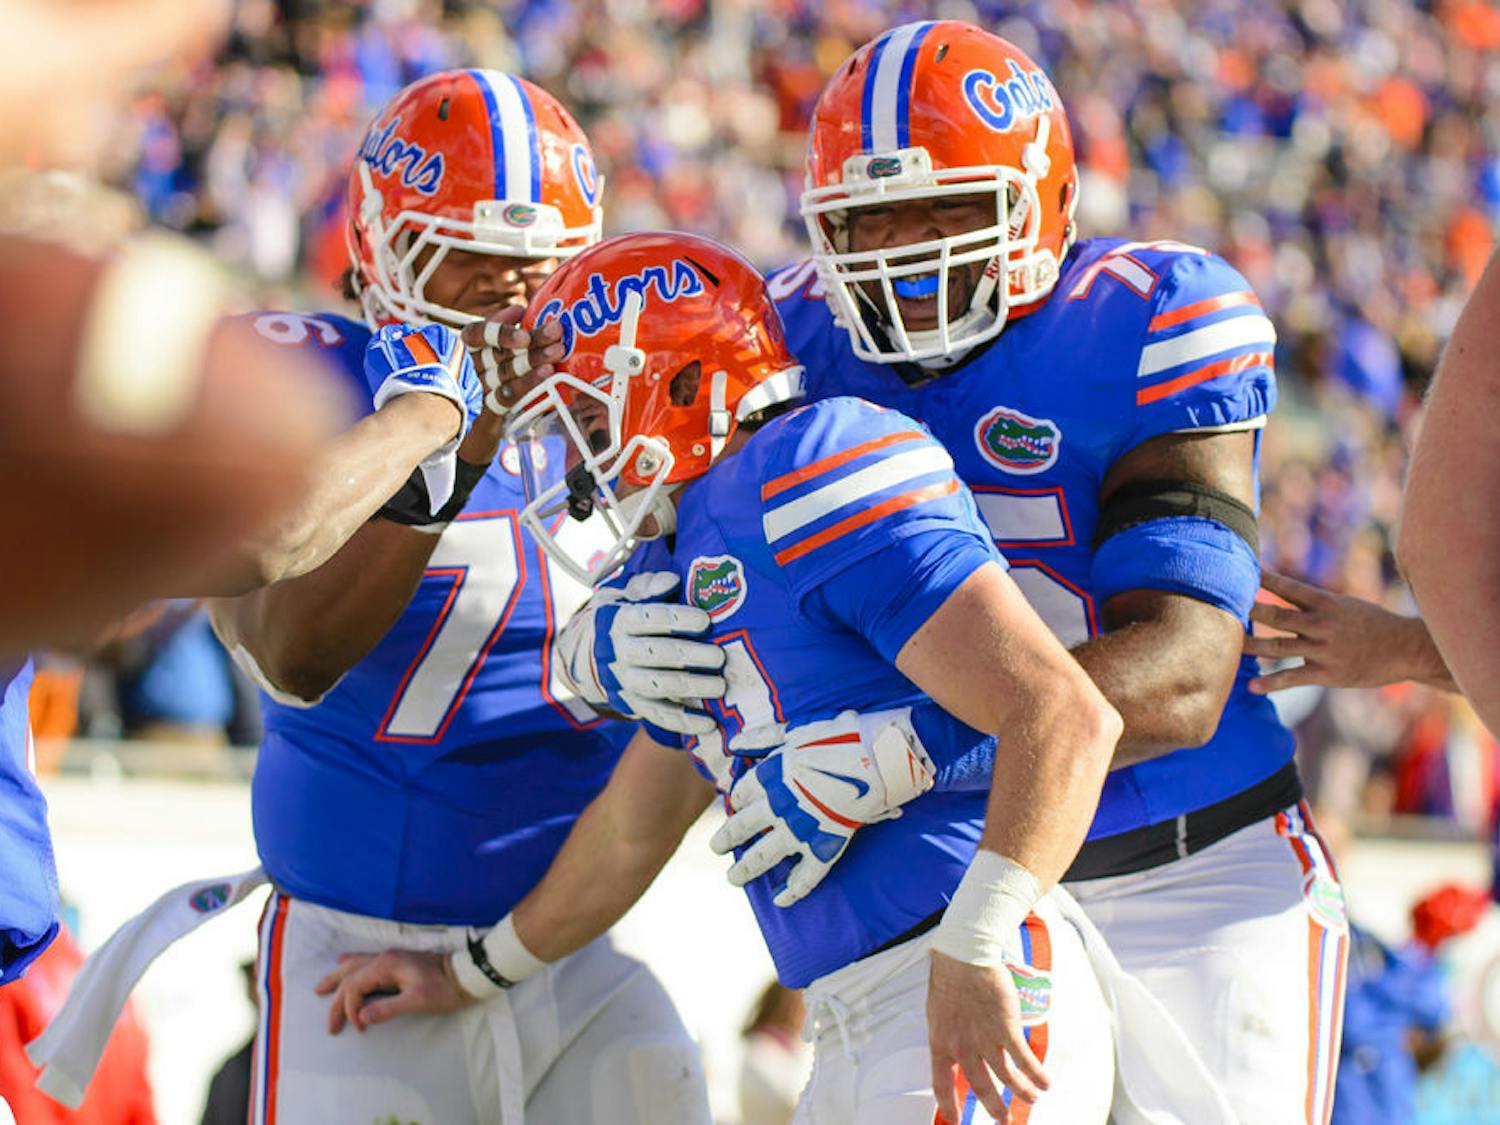 Max Garcia and Chaz Green celebrate with Mike McNeely after his touchdown during Florida's 38-20 win against Georgia on Saturday